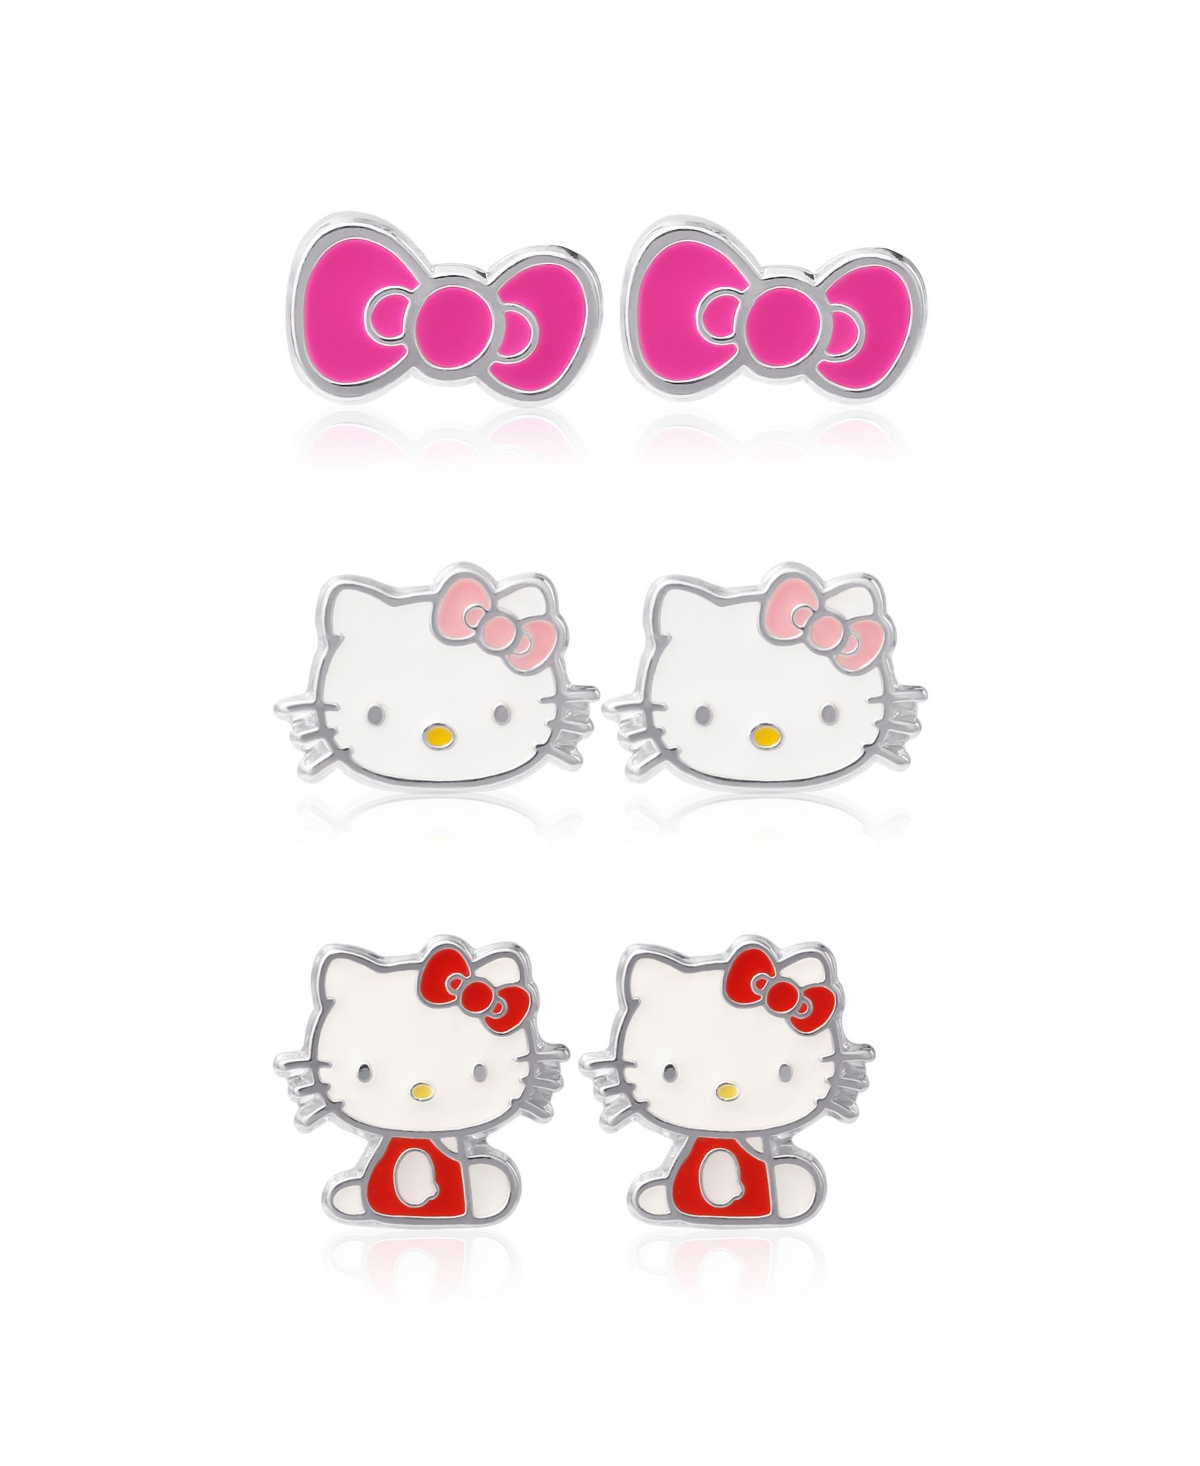 Sanrio Silver Plated and Enamel Stud Earrings Set - 3 Pairs, Officially Licensed - Pink, white, red